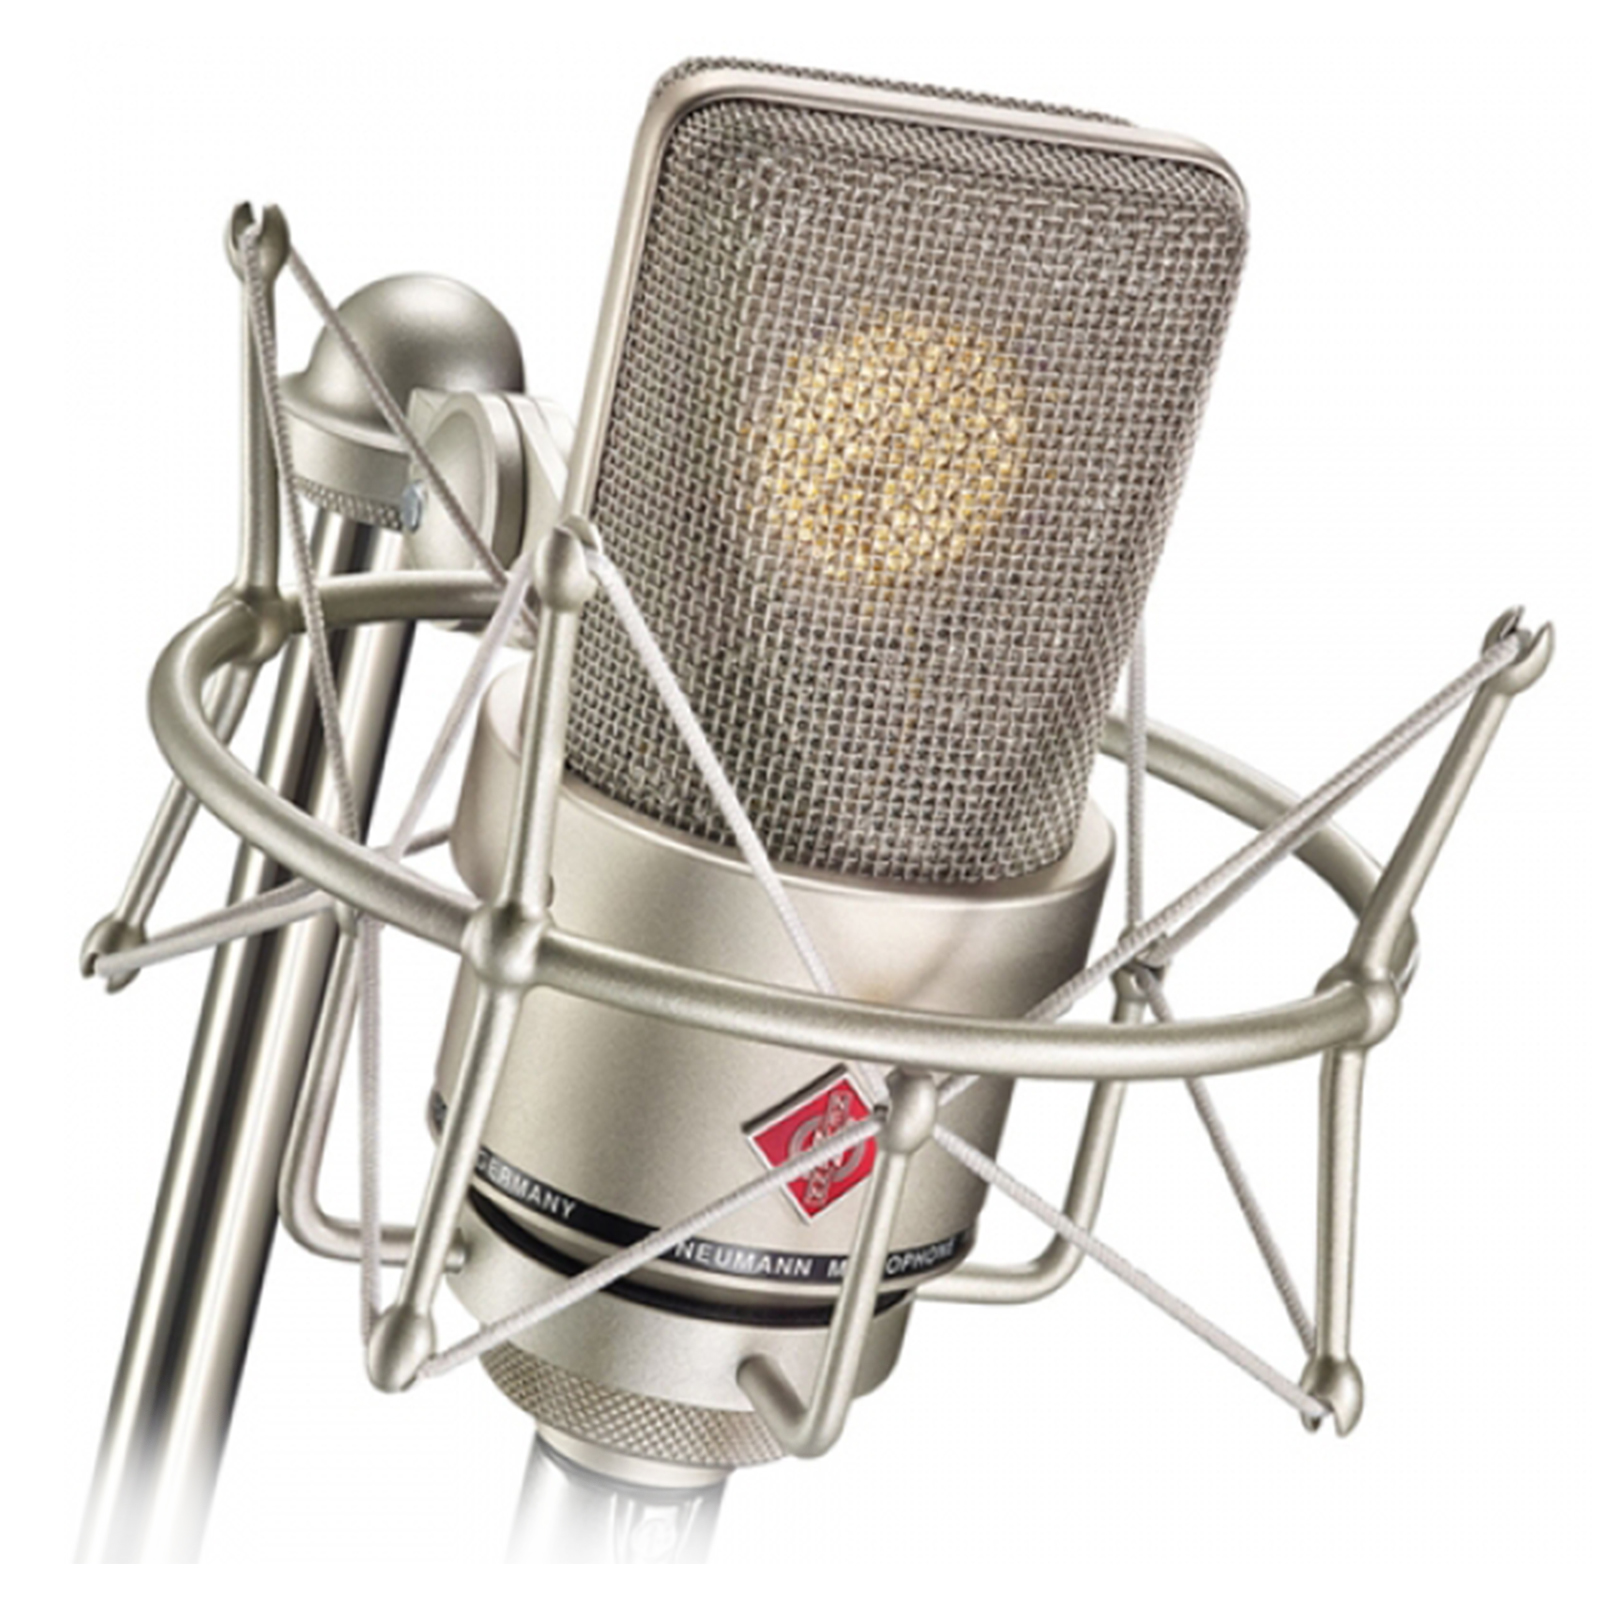 Image of Neumann TLM 103 Microphone